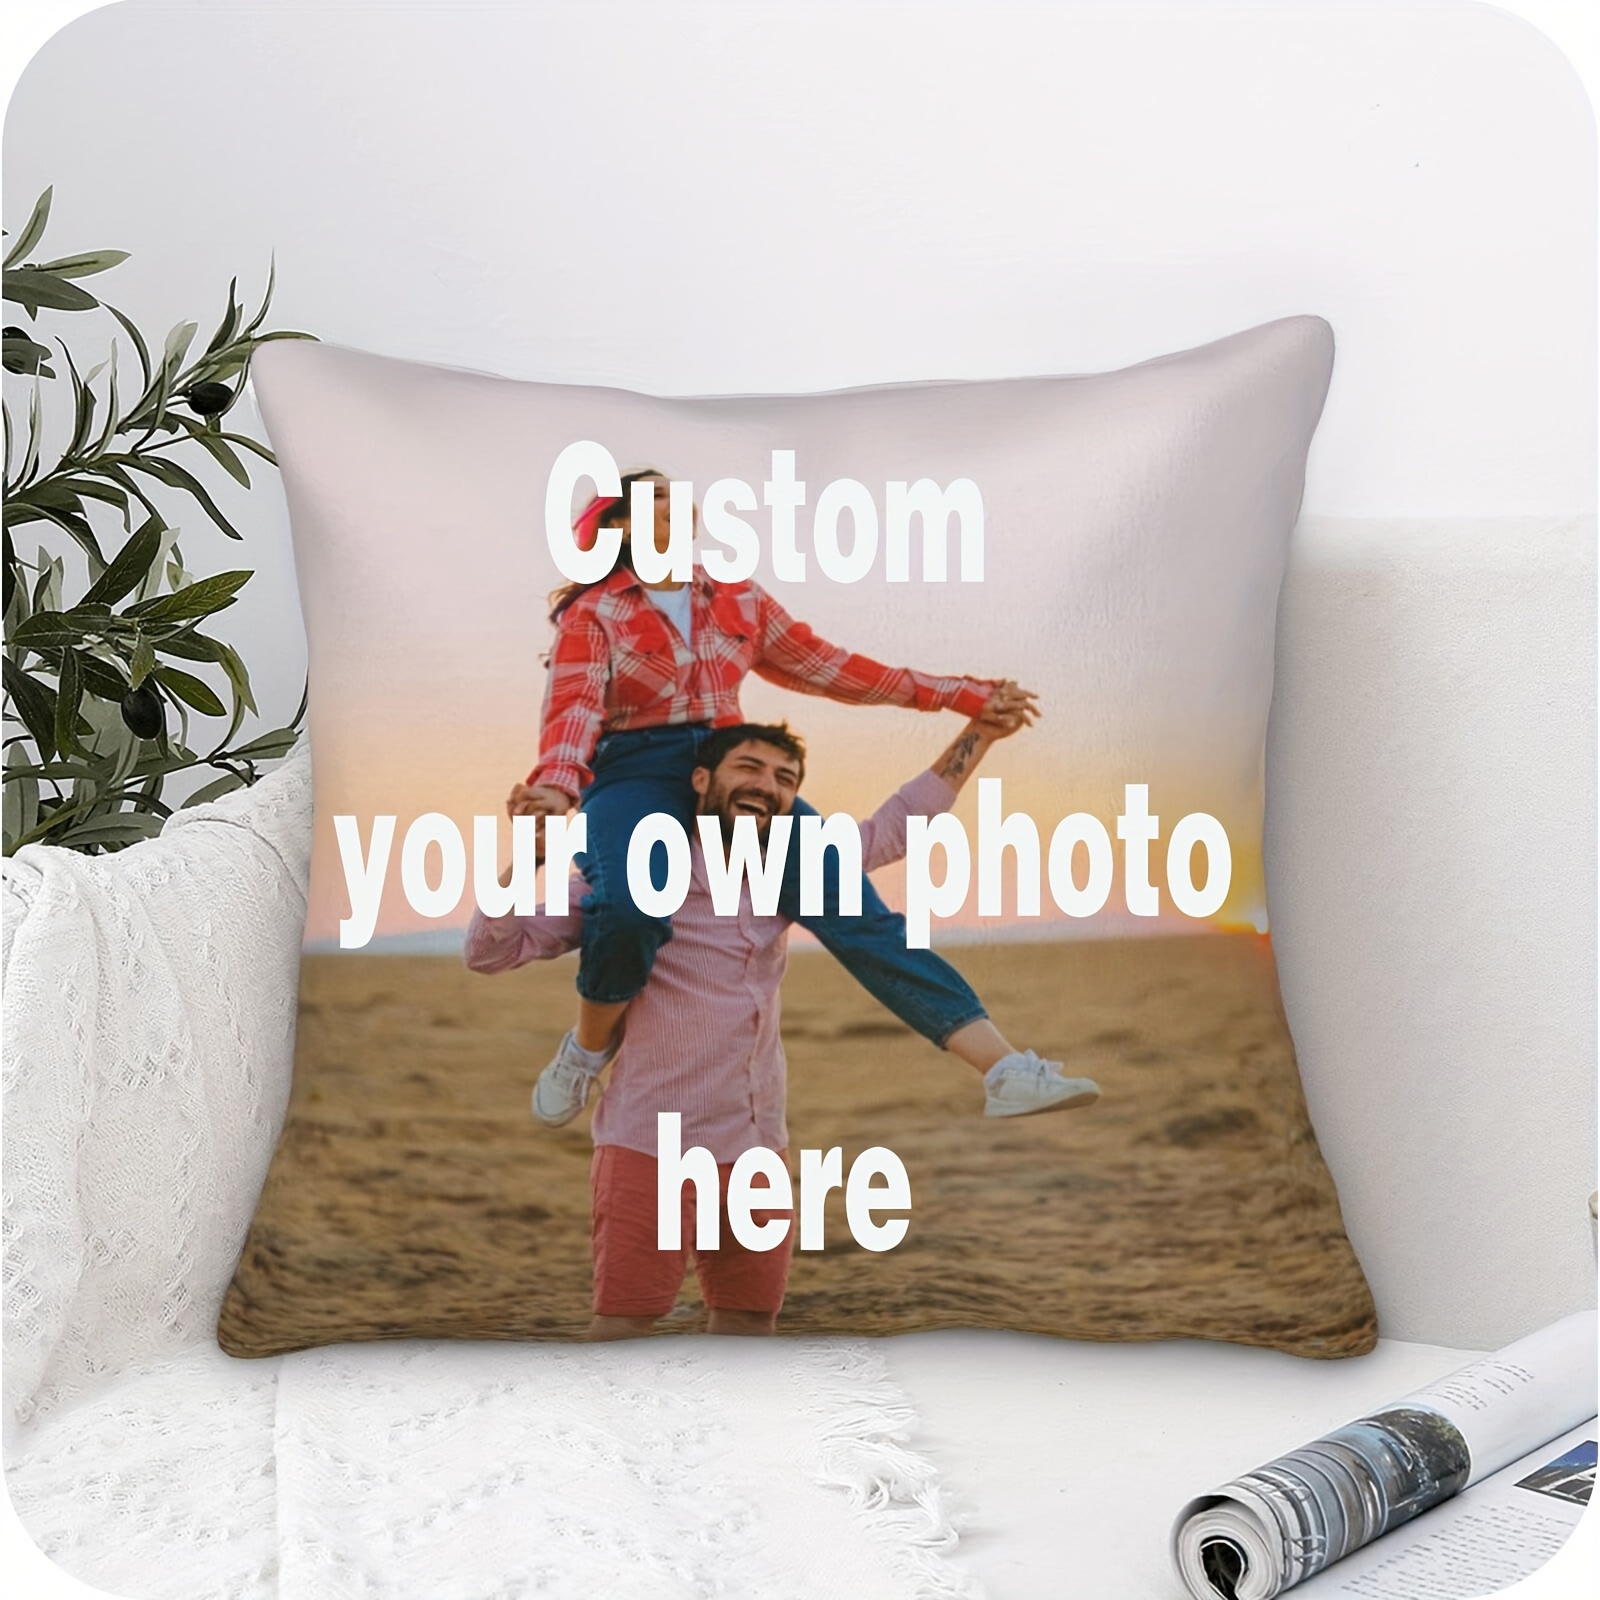 

1pc Pillow Cover Personalized Single-sided Printed Throw Pillow With Custom Photo, Cushion With Insert With Custom Wedding Pictures, Gift For Lovers On Valentine's Day Wedding Anniversary